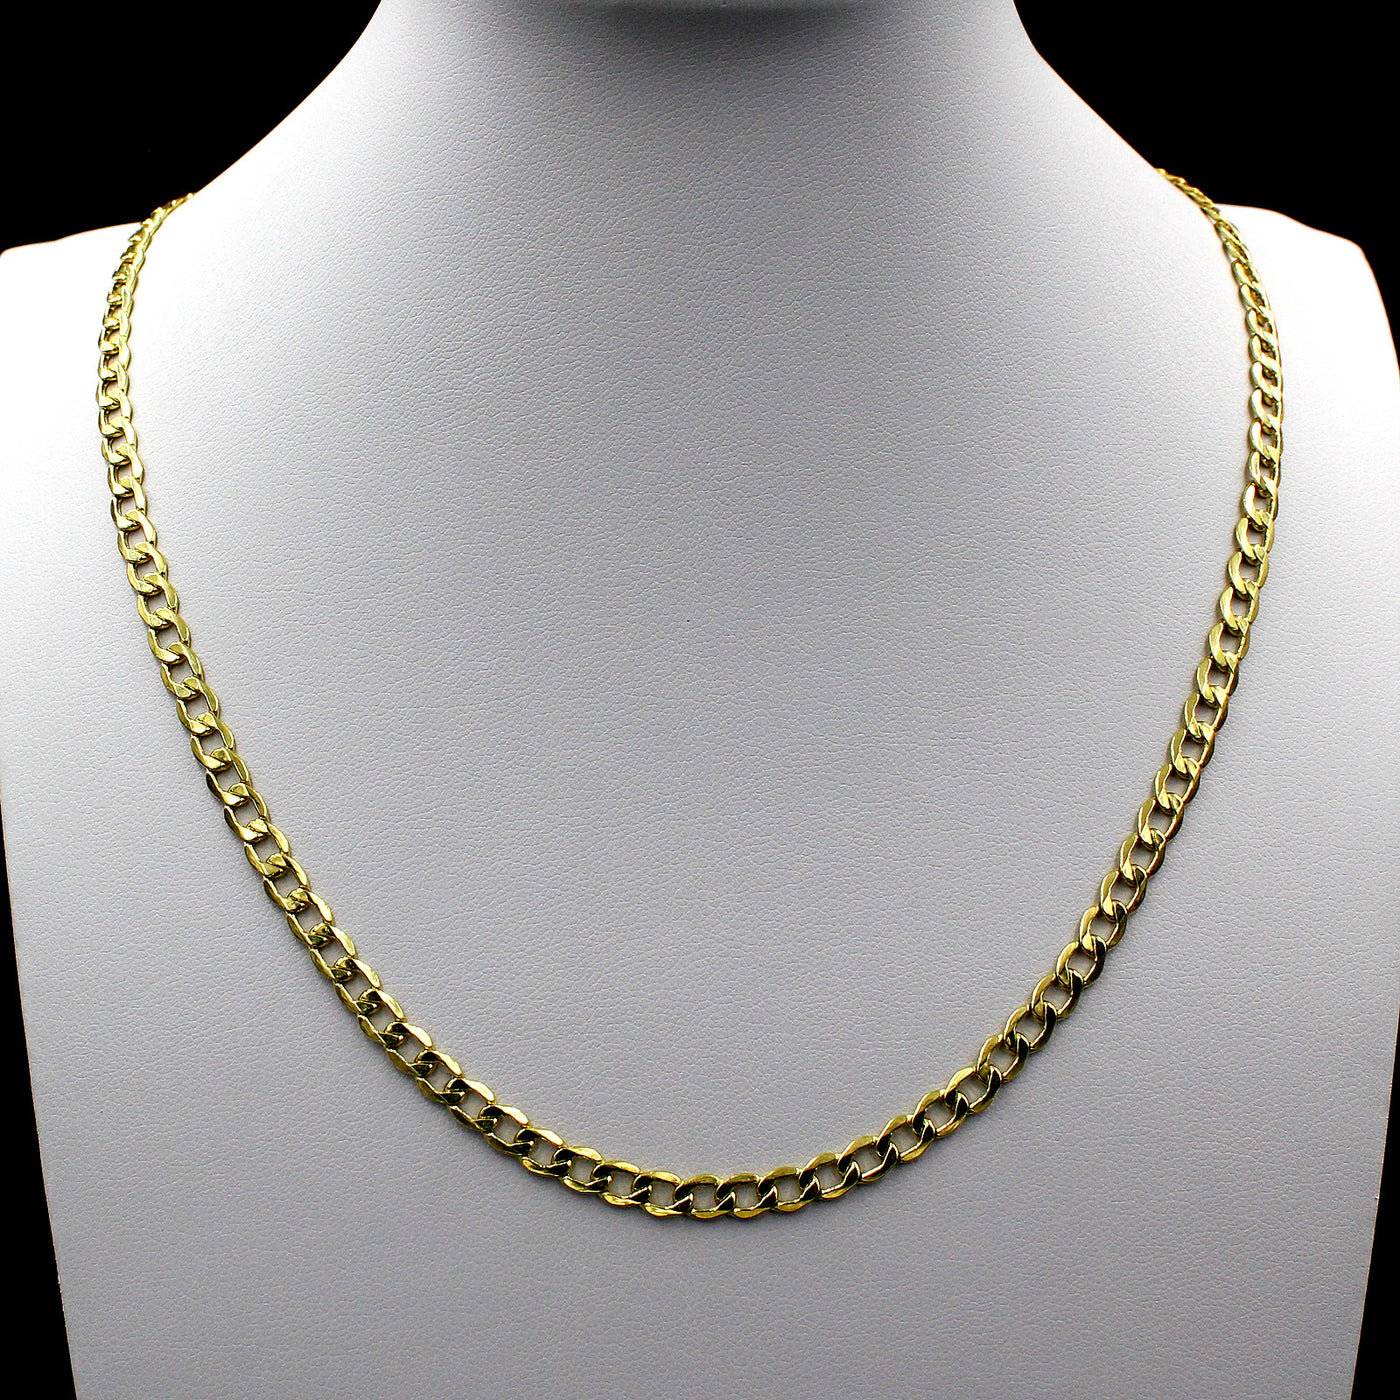 10K Solid Yellow Gold Cuban Link Chain Necklace 2.5MM 16" 18" 20" 22" 24"